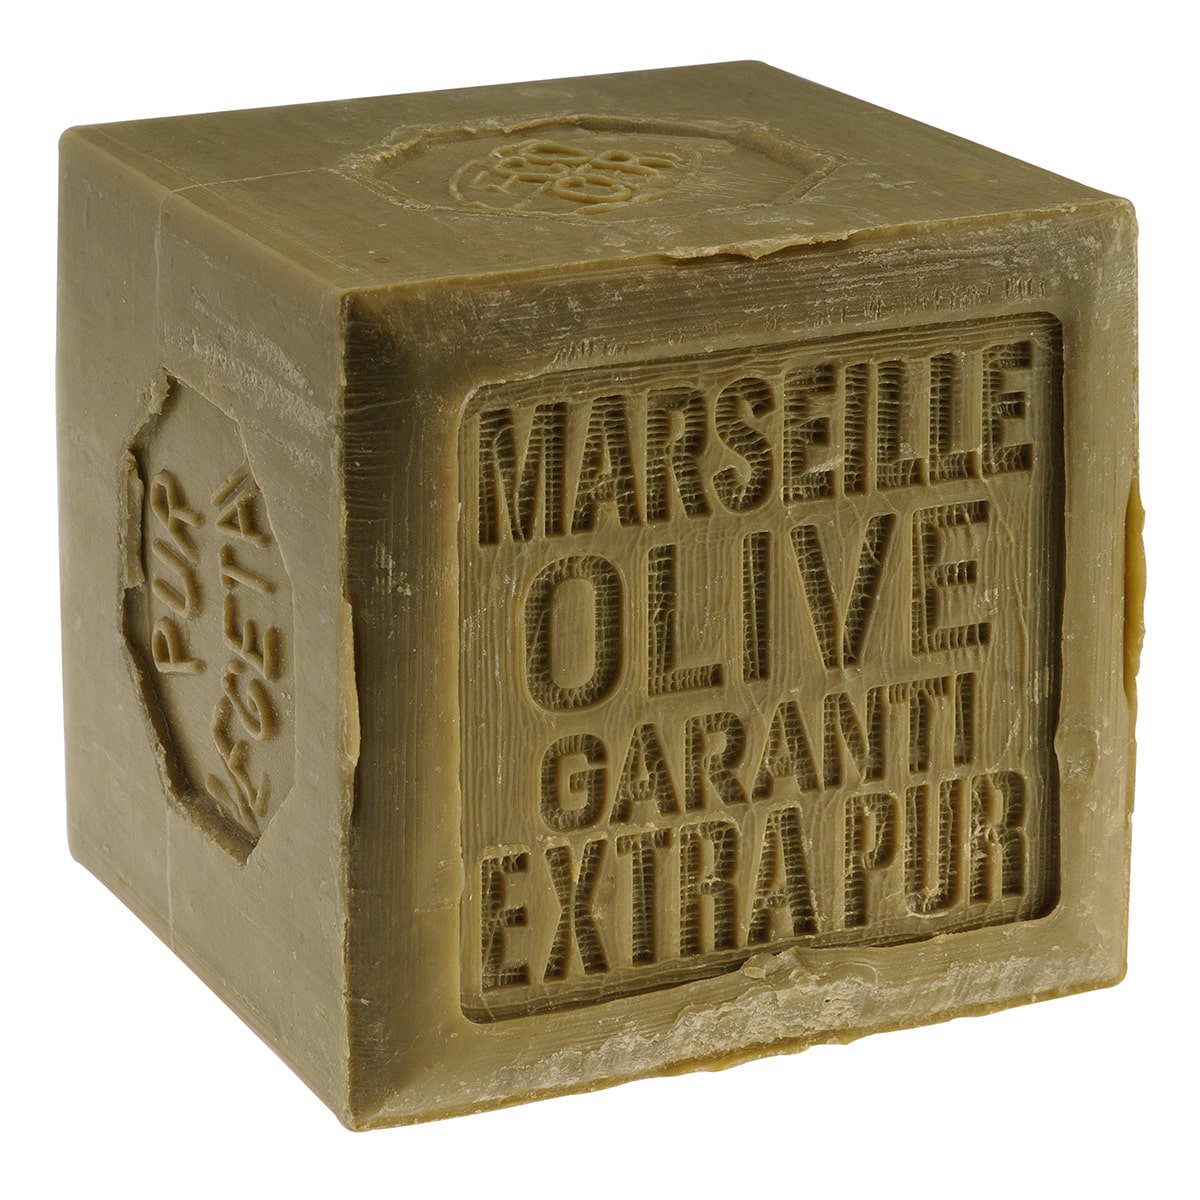 H2O at Home Liquid Marseille Soap (olive) ingredients (Explained)